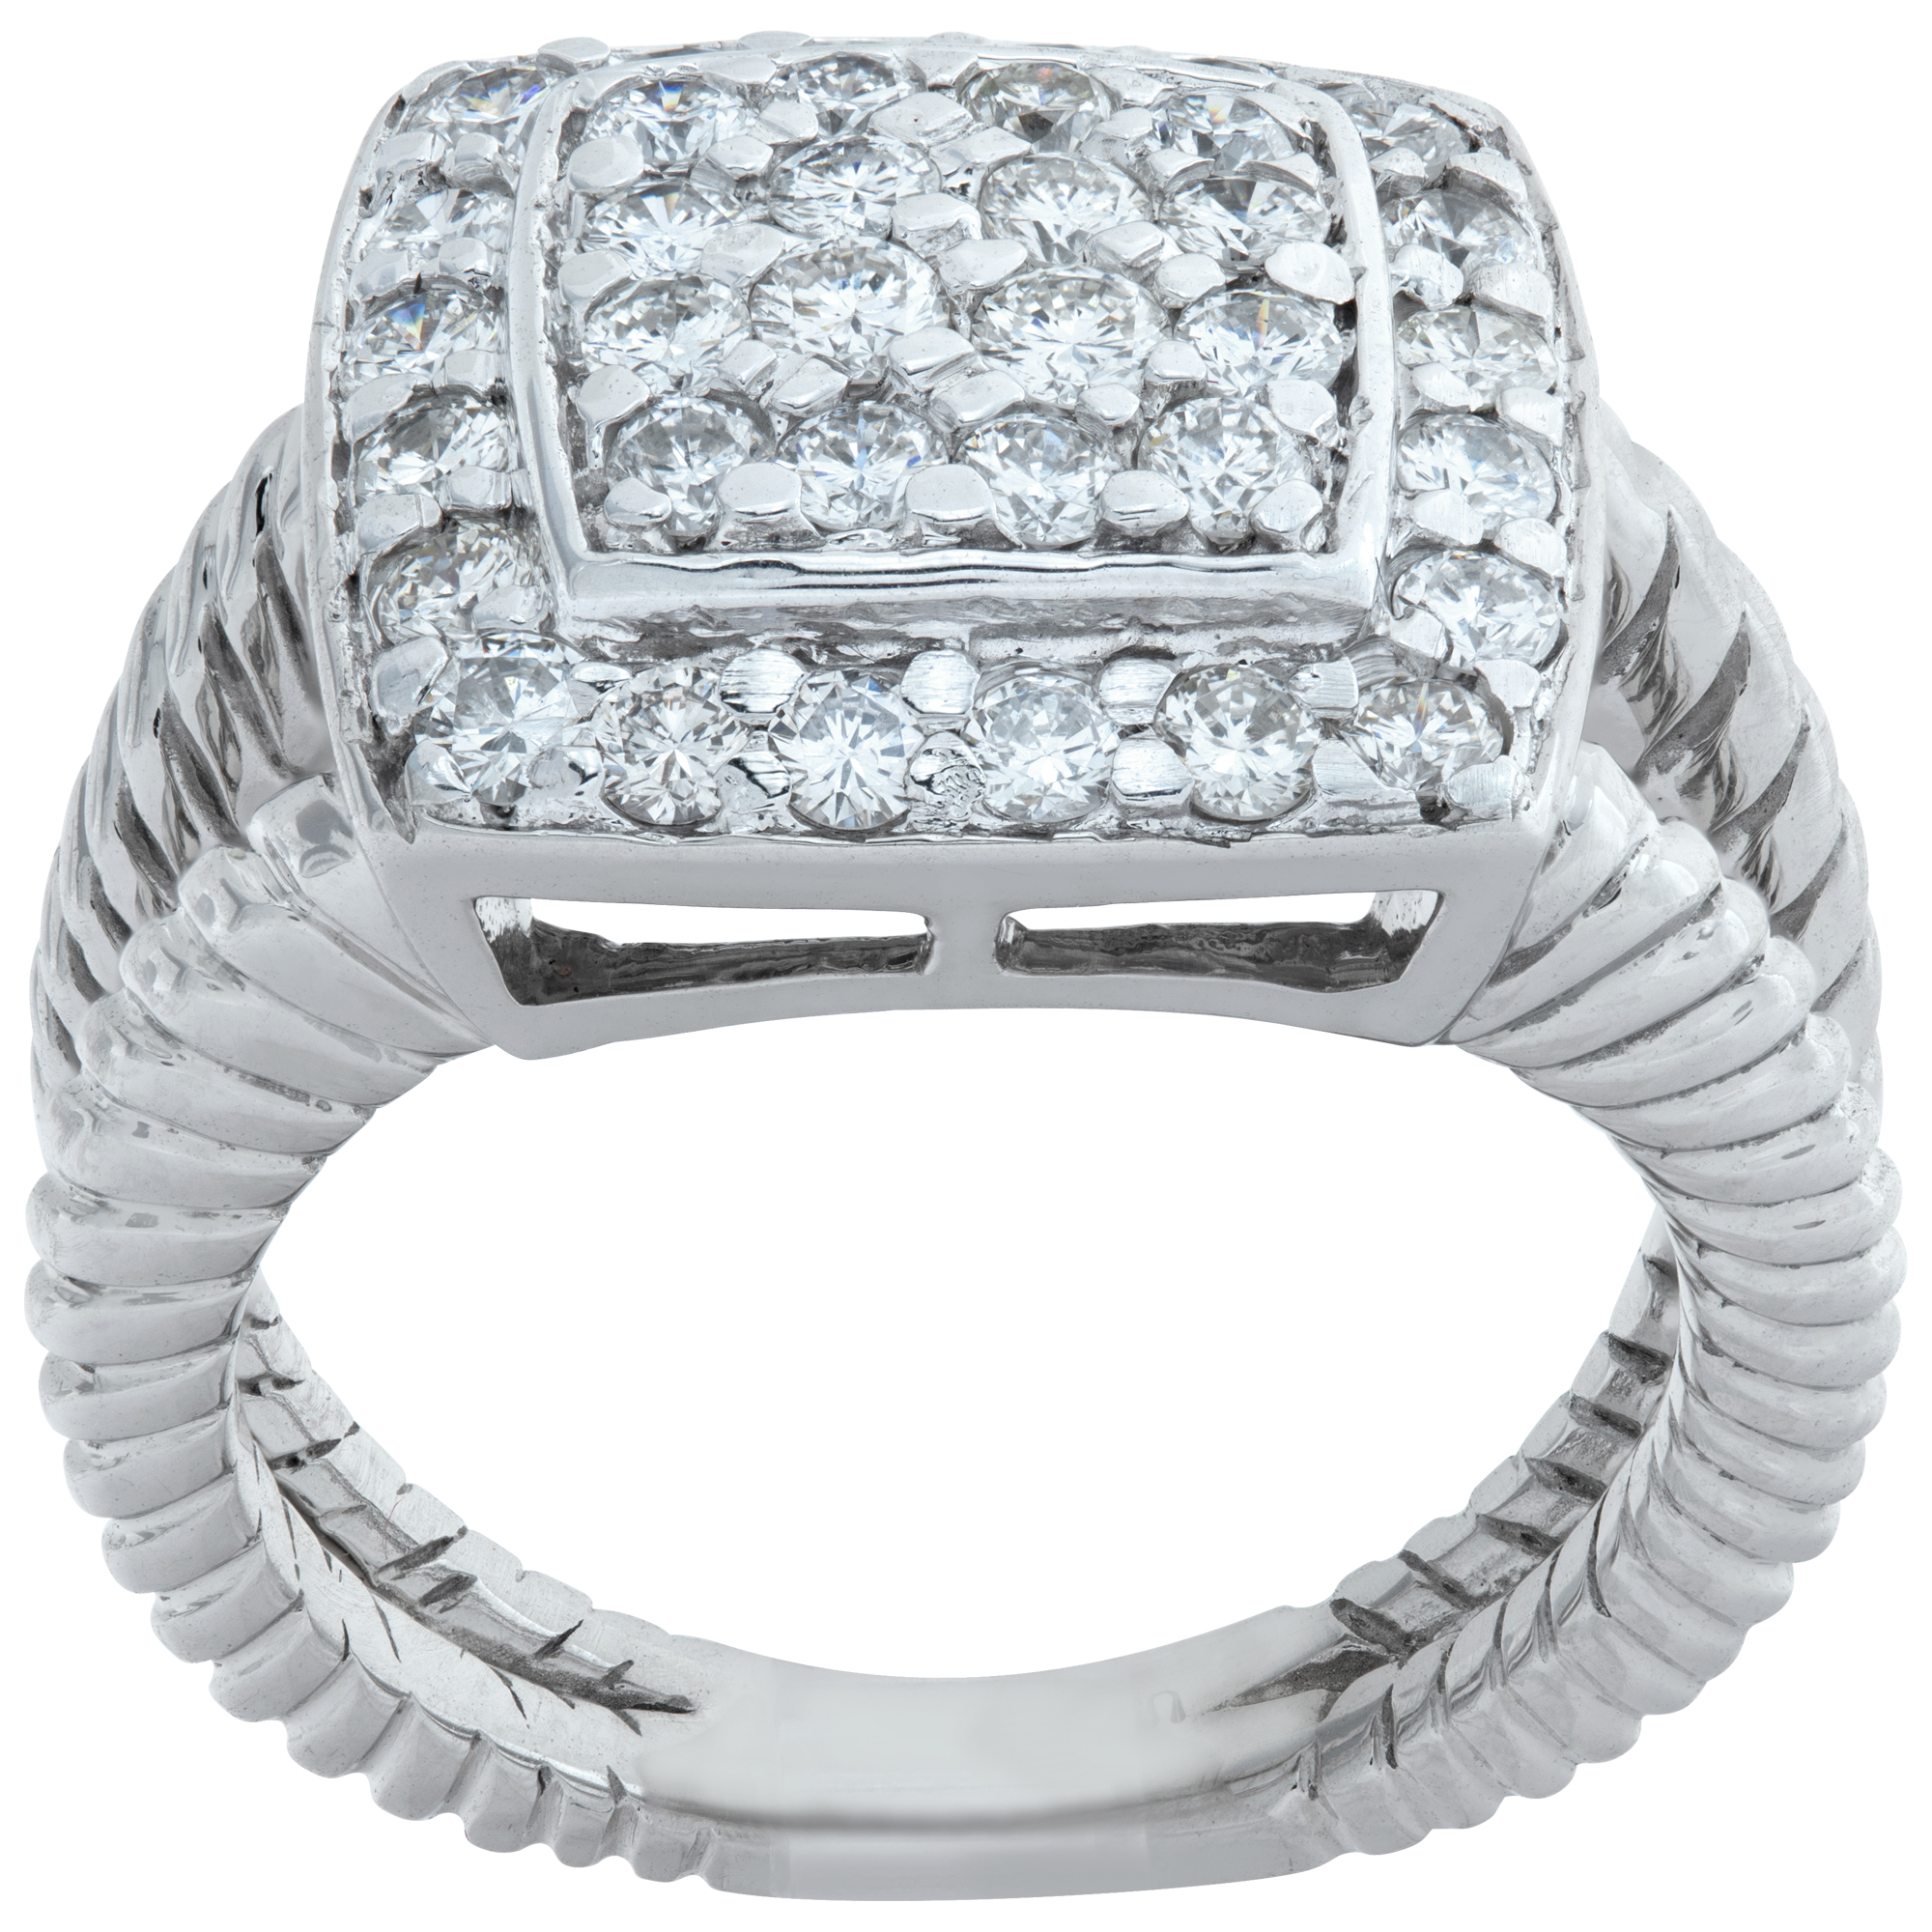 Pave diamond ring in 14k white gold with approximately 1.21 carats in diamonds (G-H Color, VS-SI Clarity)